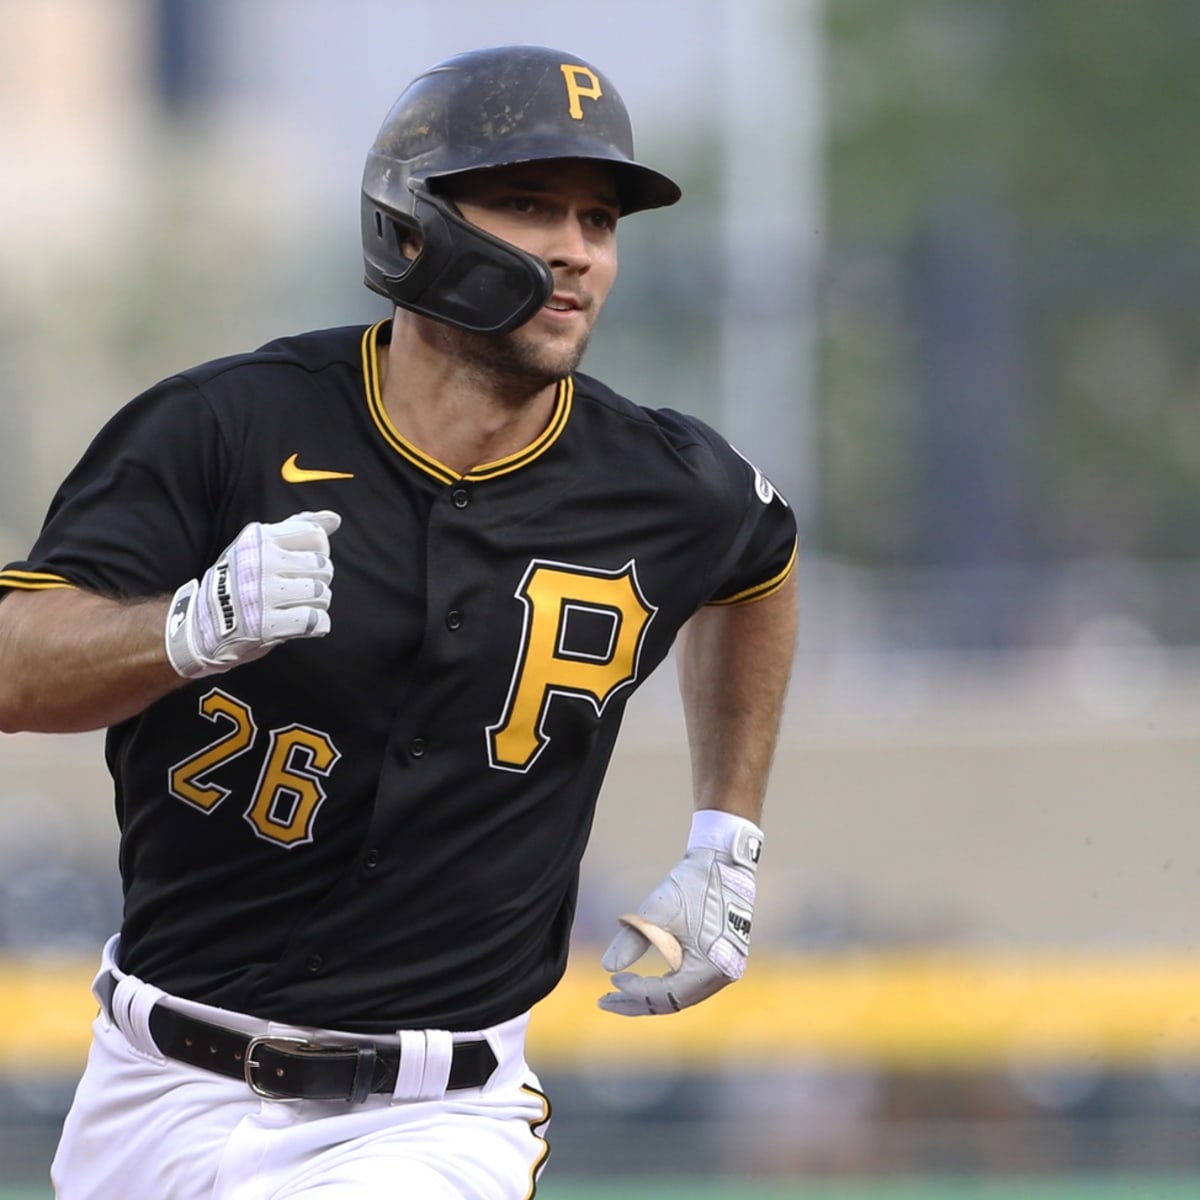 Pittsburgh Pirates 2B Adam Frazier is great fit for New York Yankees -  Sports Illustrated NY Yankees News, Analysis and More